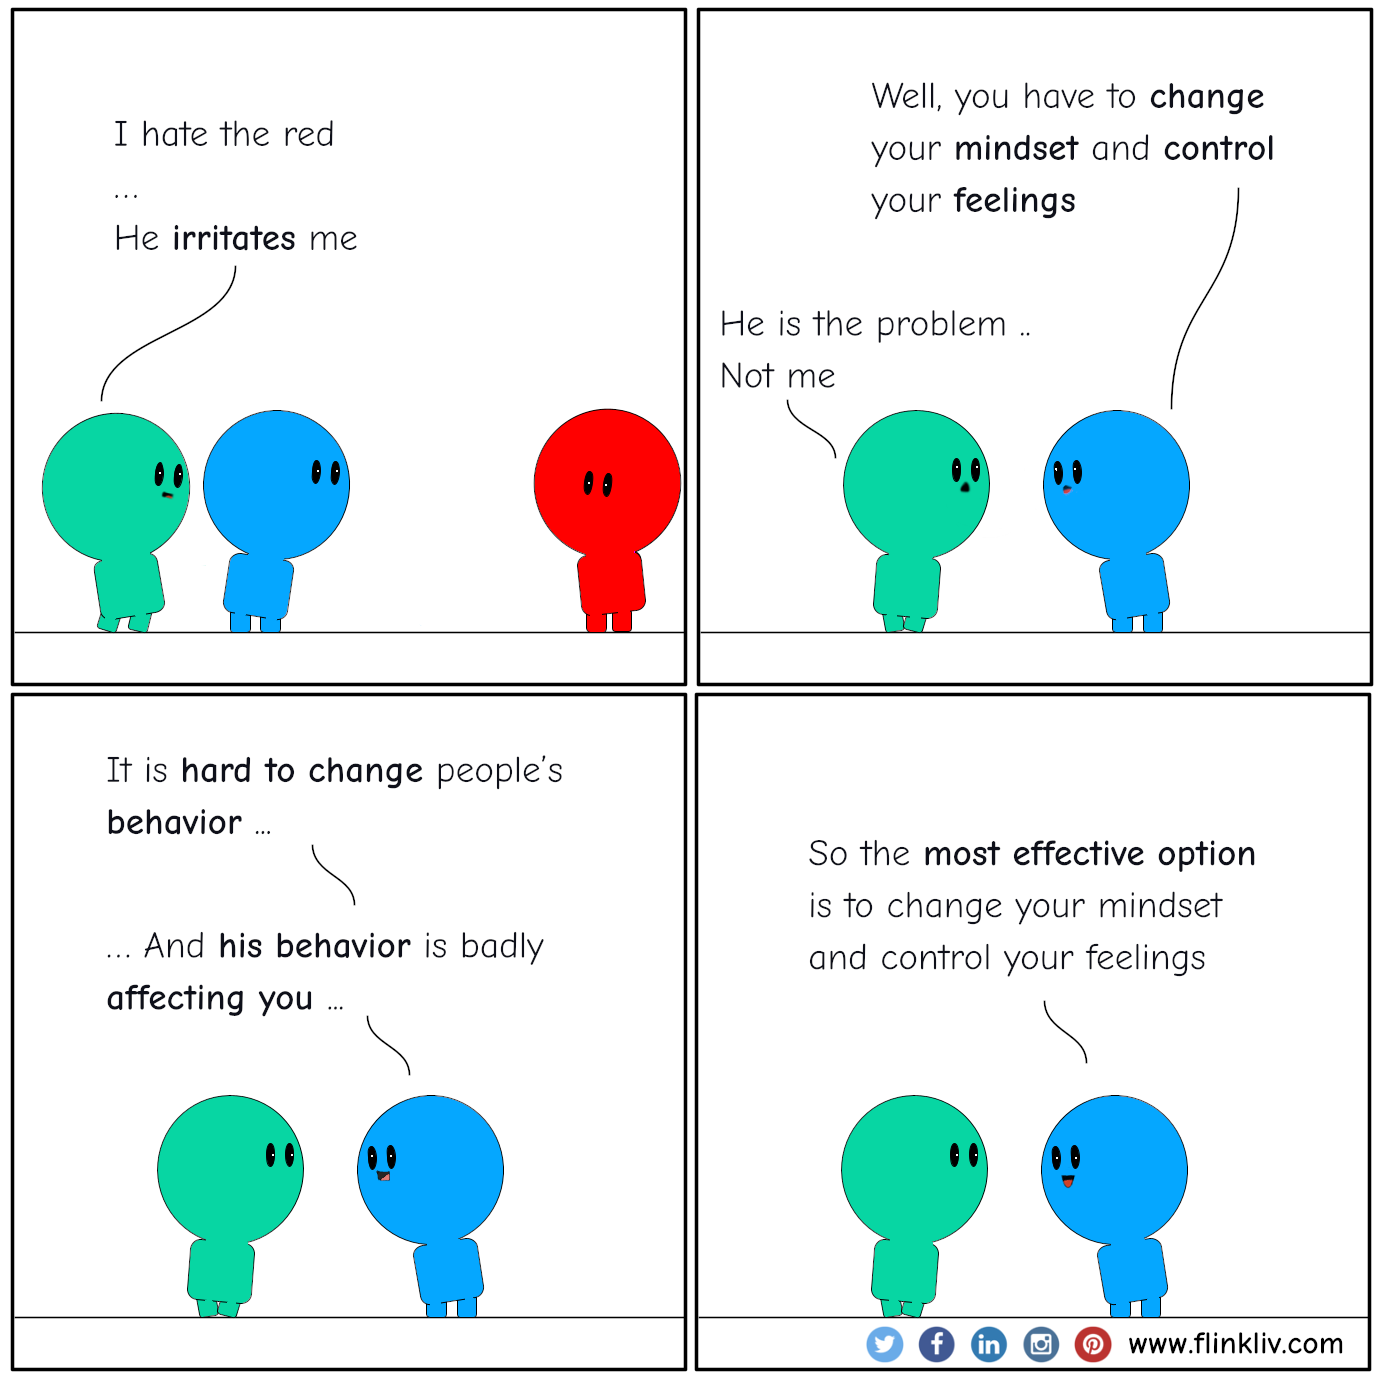 Conversation between A and B about changing your behavior to deal with difficult-people. A: I hate the red; he irritates me B: Well, you have to change your mindset and control your feelings A: He is the problem, not me B: It is hard to change people’s behavior, and his behavior is badly affecting you B: So the most effective option is to change your mindset and control your feelings. By flinkliv.com